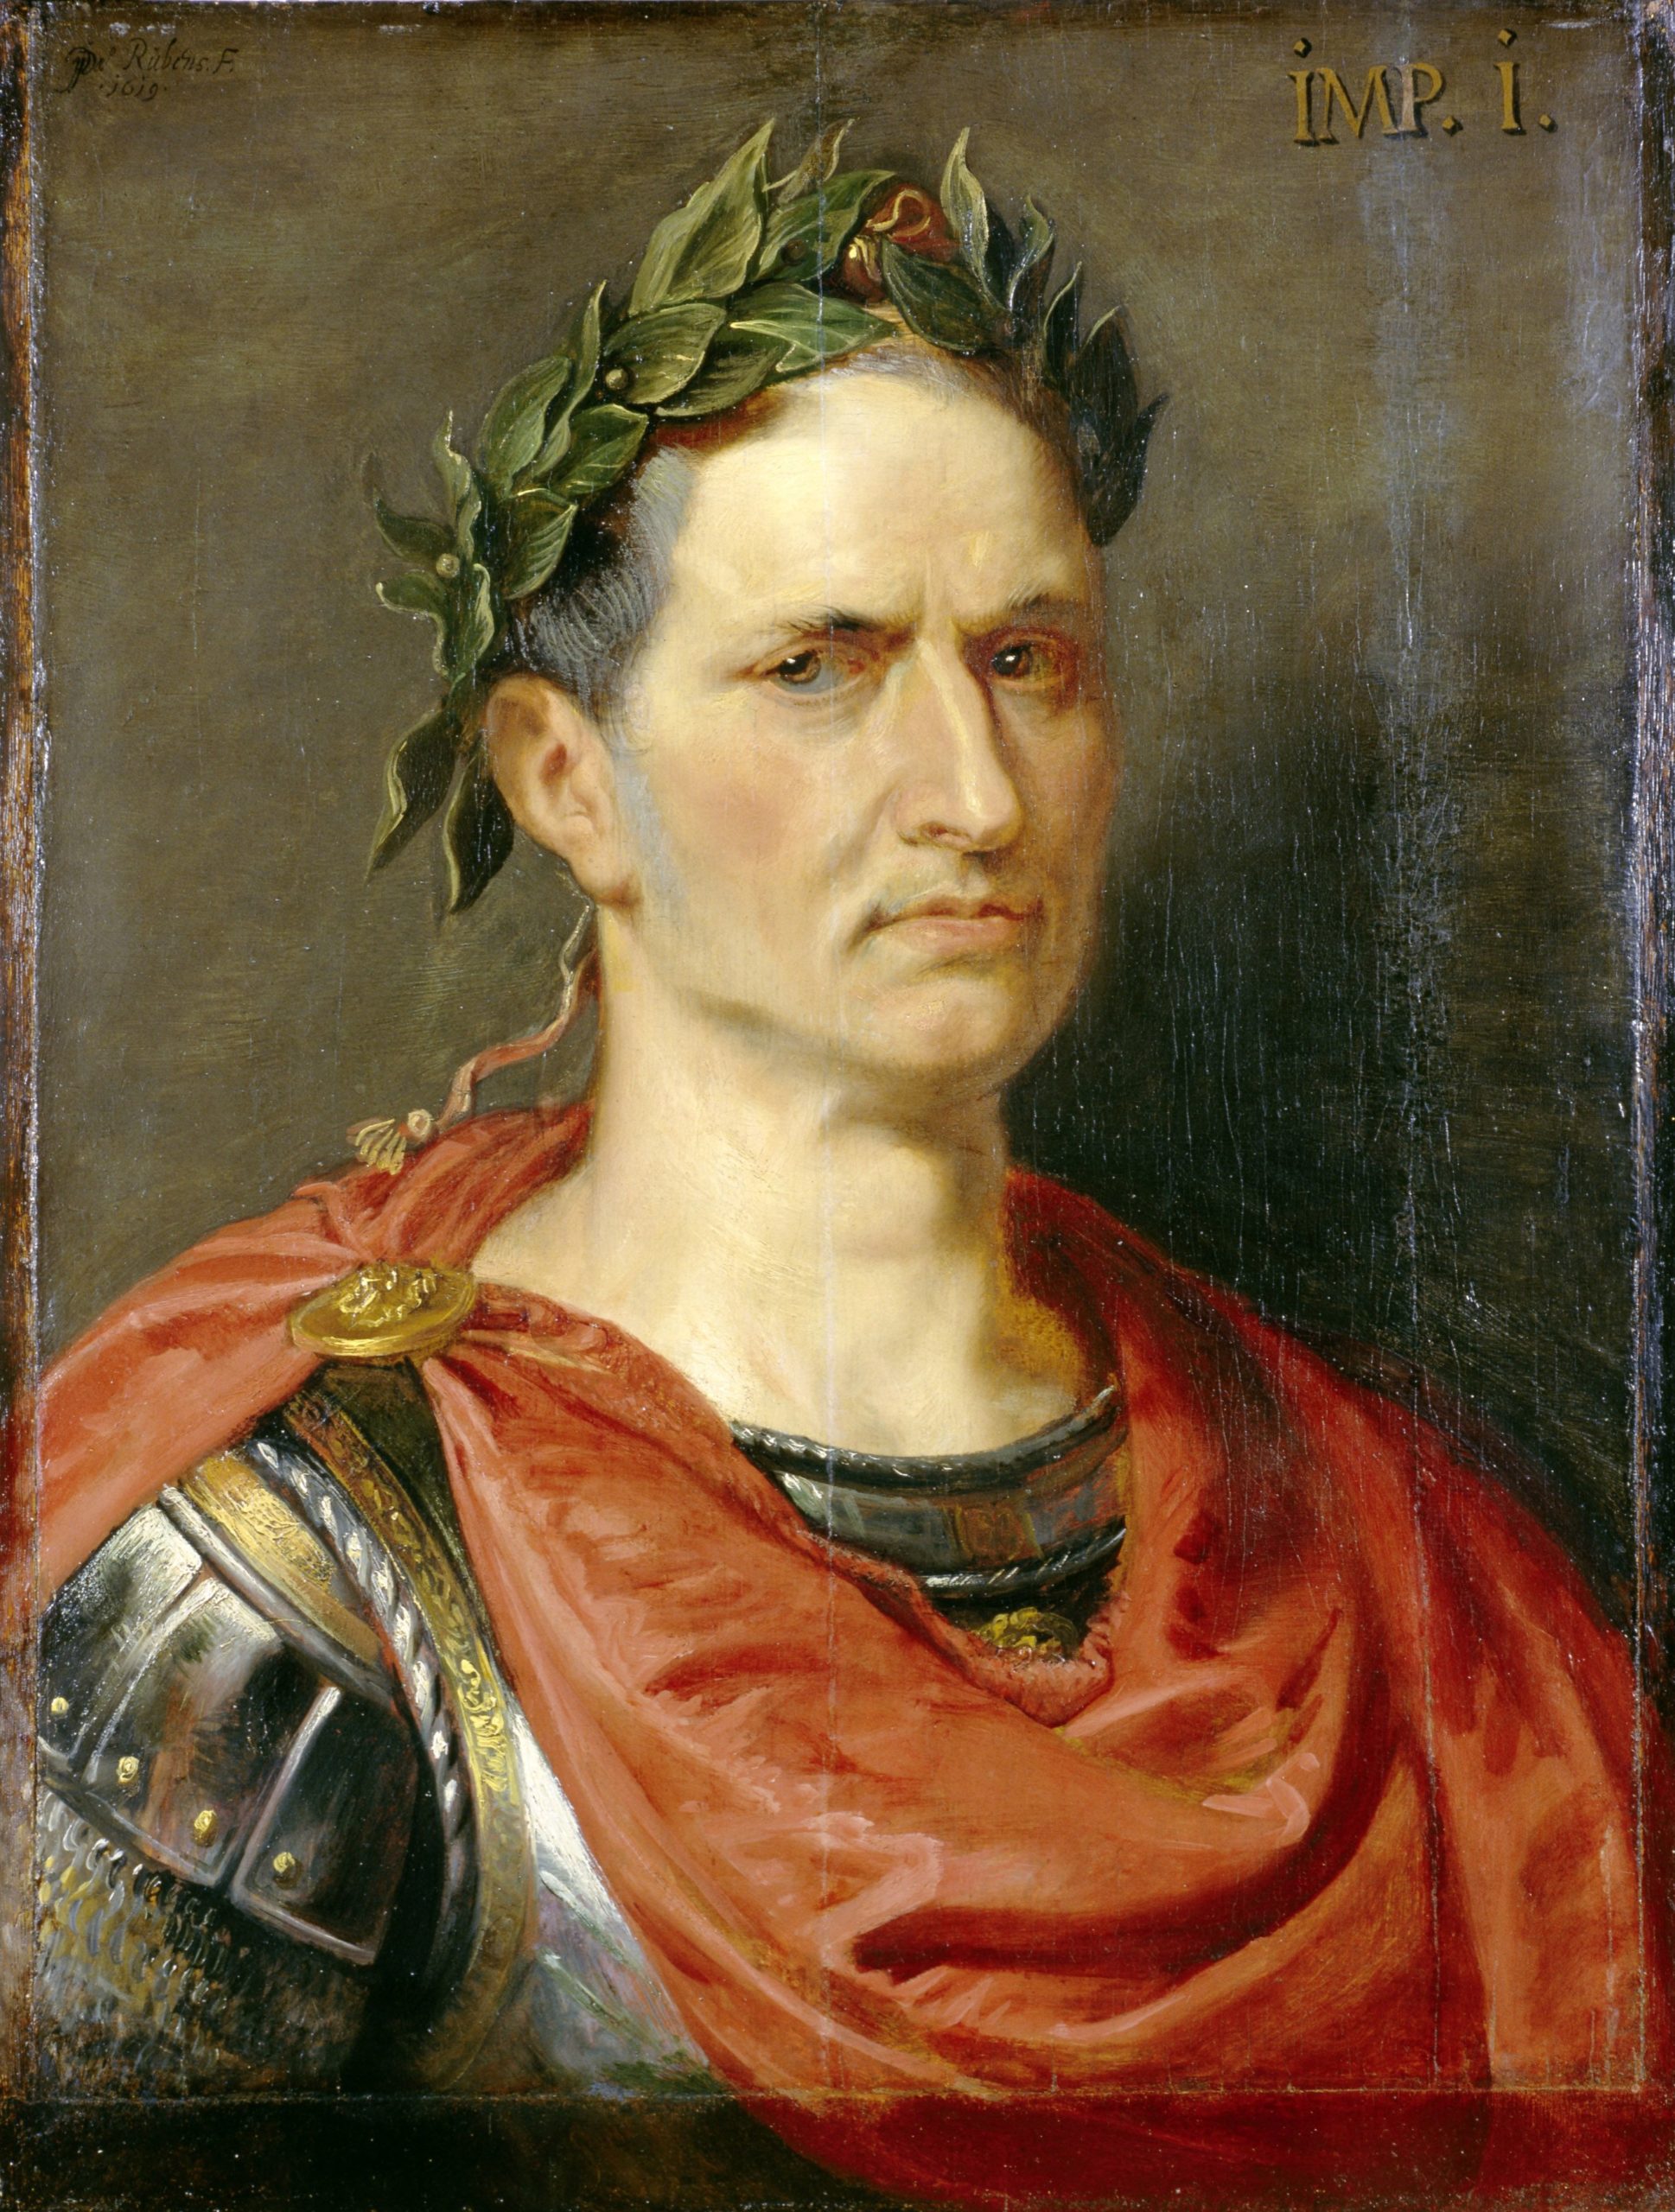 15 Most Influential People in History - Julius Cäsar